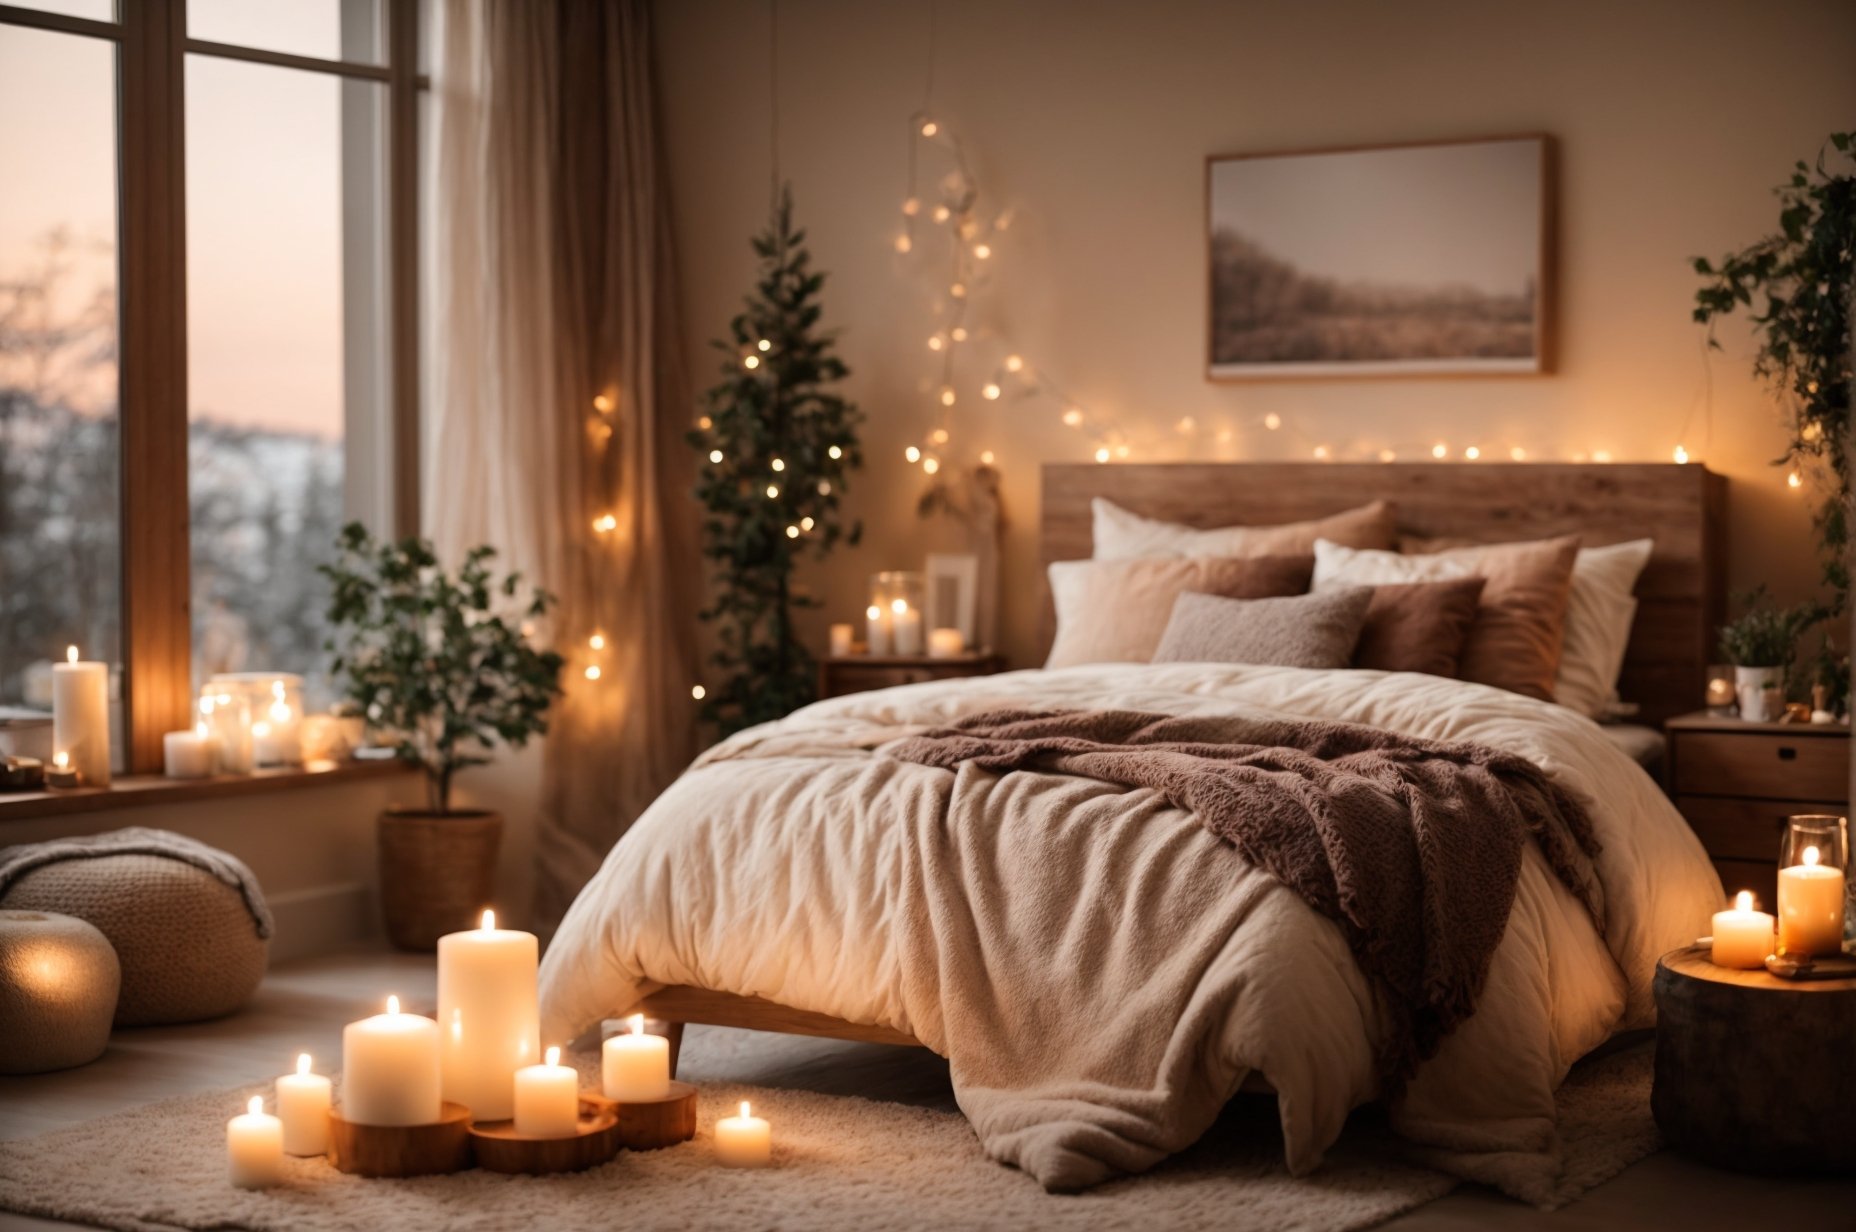 Embrace Coziness: Creating a Hygge Atmosphere in Your Home